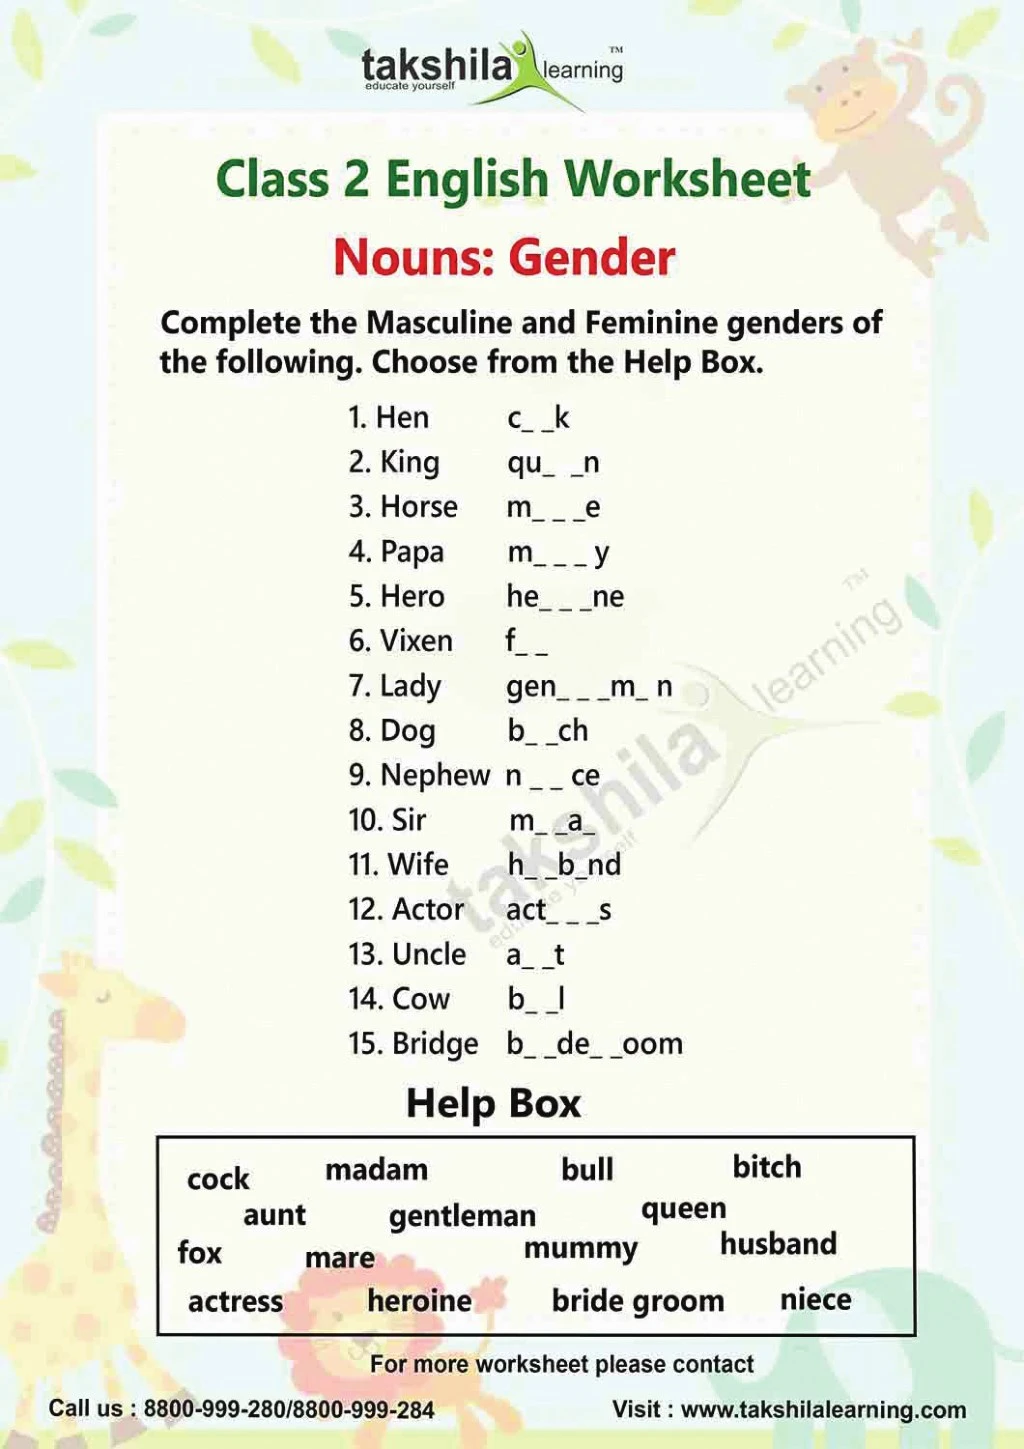 ppt-download-worksheets-for-class-2-english-nouns-gender-takshilalearning-powerpoint